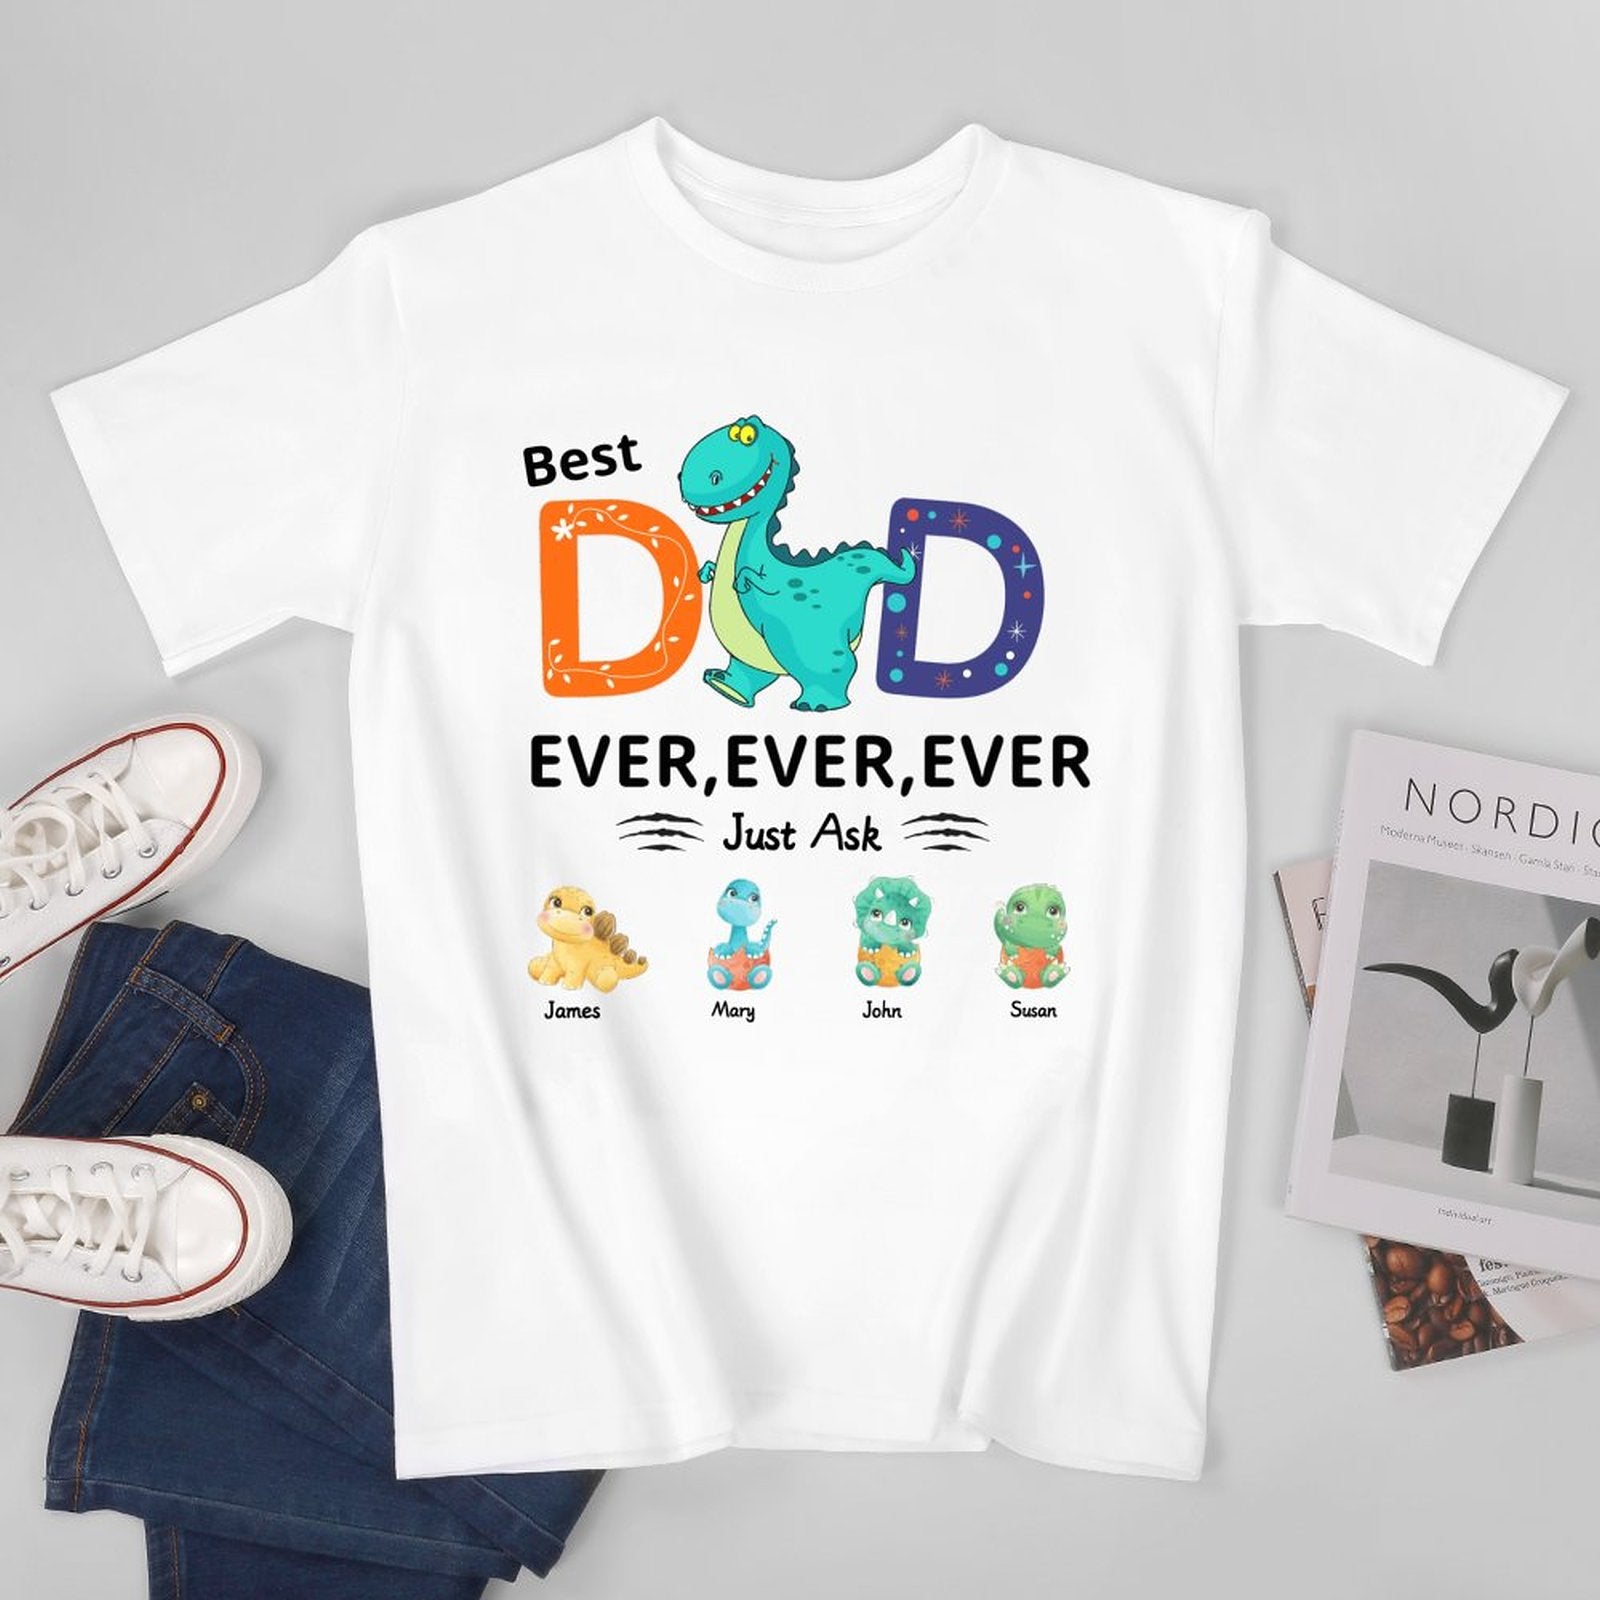 Father's Day Gift-Custom kids Name Shirt, Personalized Custom Cartoon T-Shirt As Father's Day Birthday Gifts For Men Dad - colorfulcustom